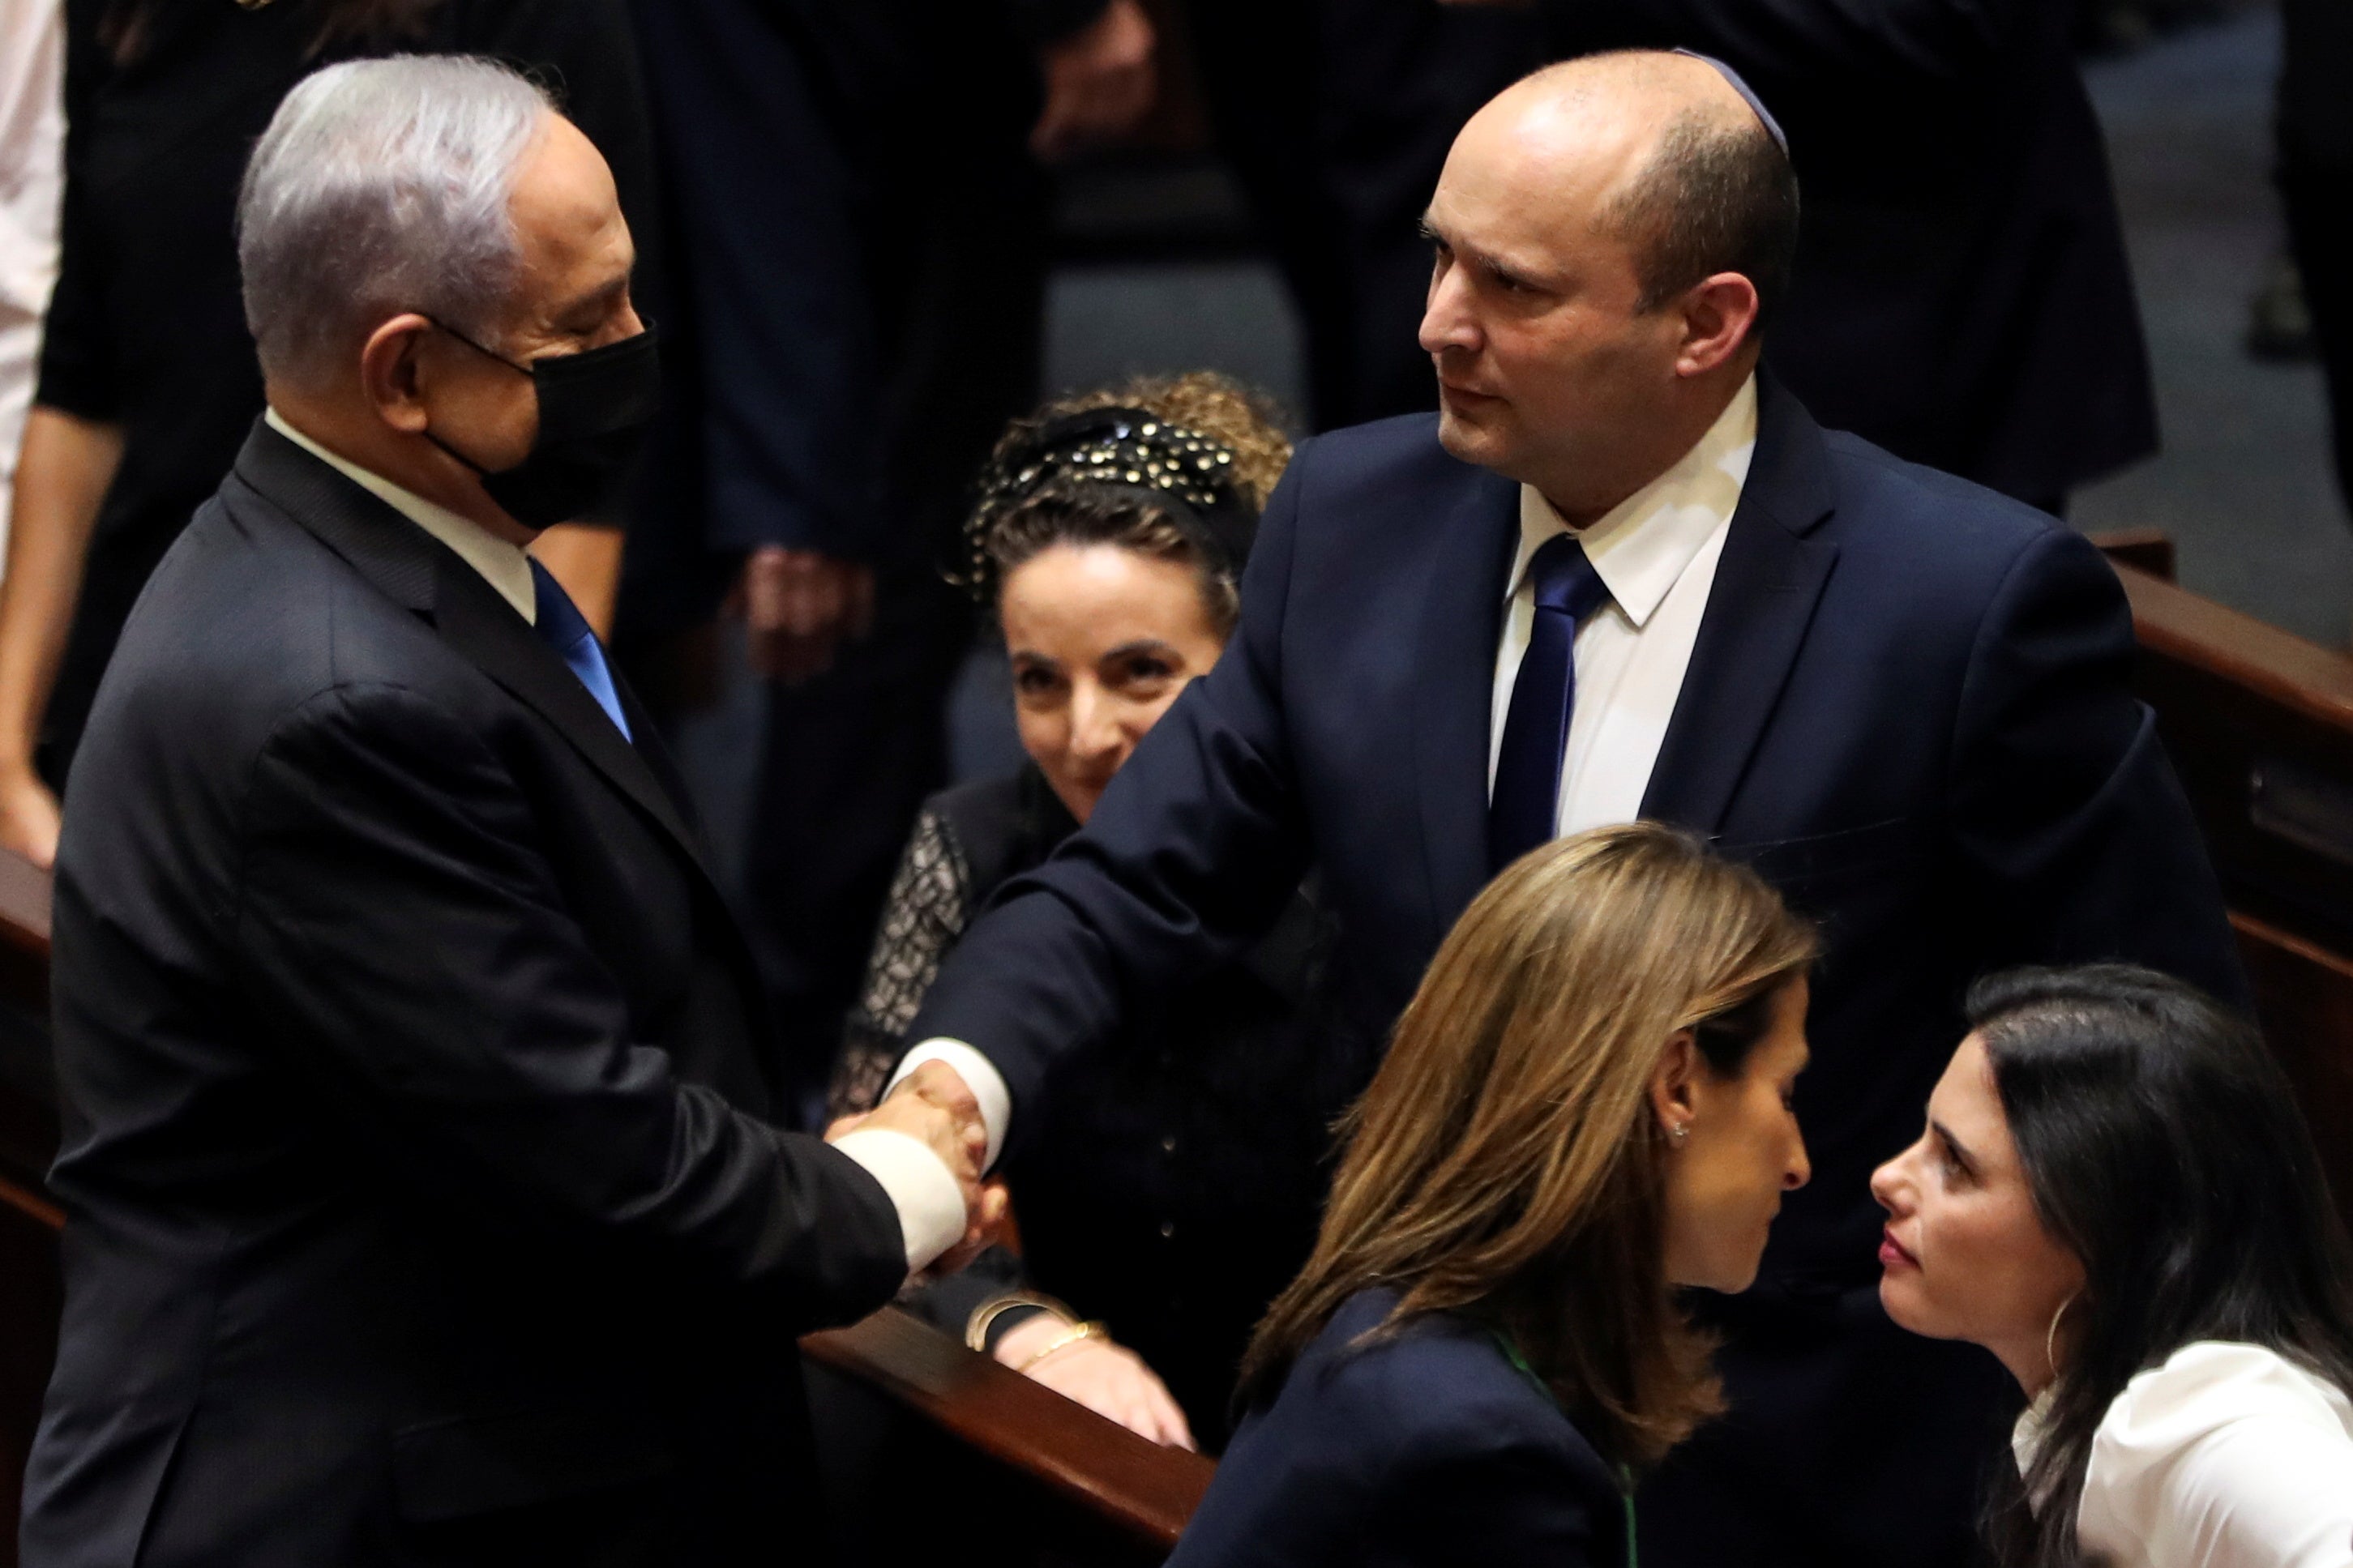 Benjamin Netanyahu shakes hands with the man who has replaced him as Israel Prime Minister, Naftali Bennett, following the vote on the new coalition at the Knesset, Israel’s parliament